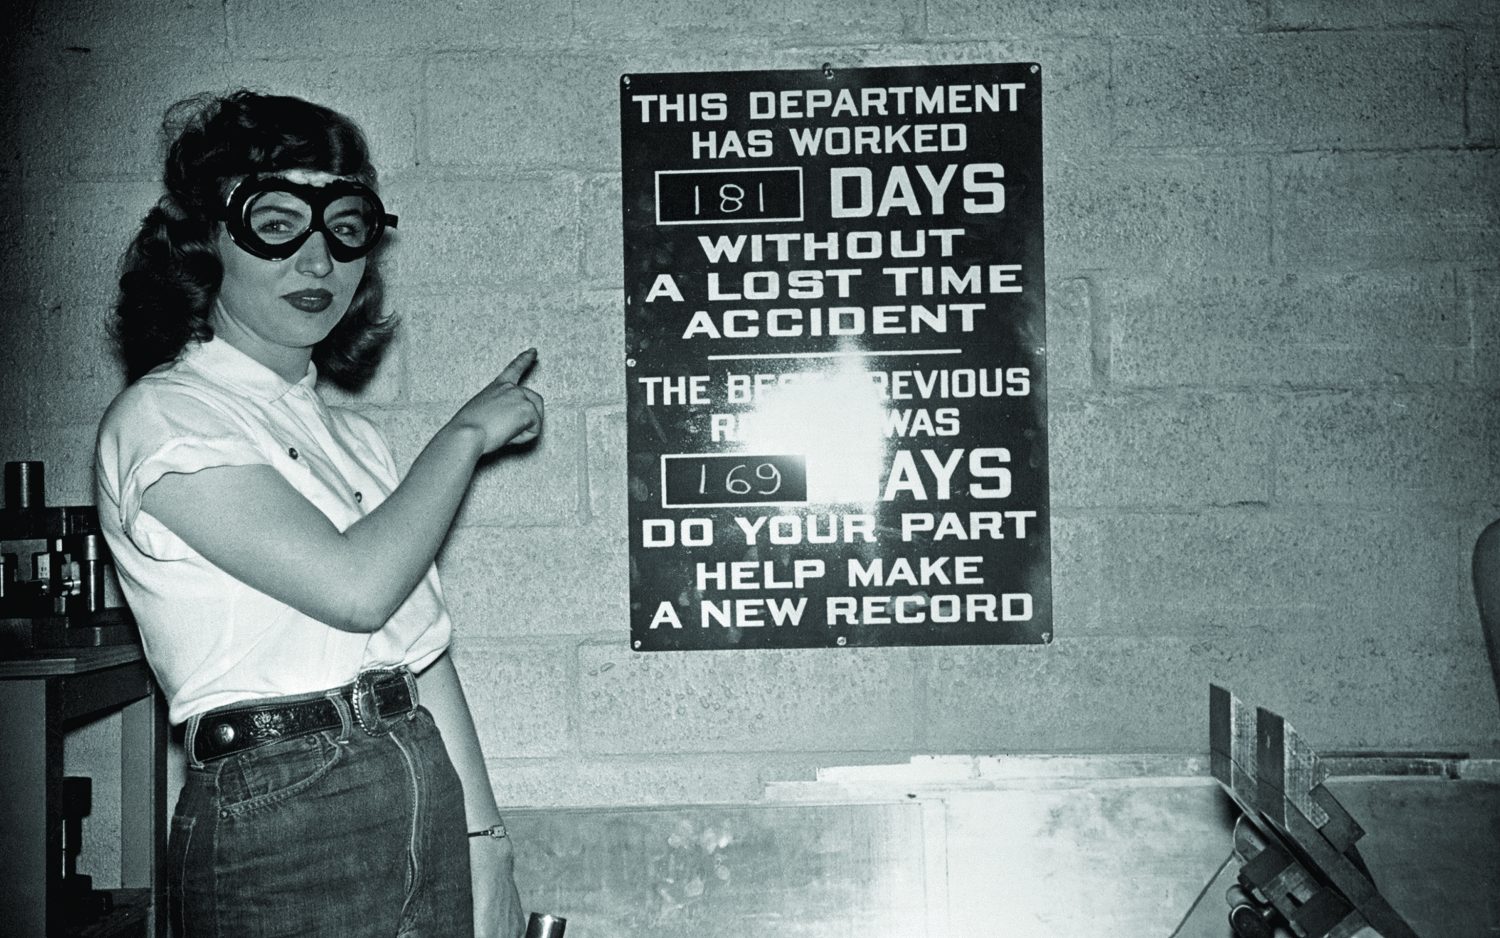 Woman points at a sign showing 181 days without a lost time accident.